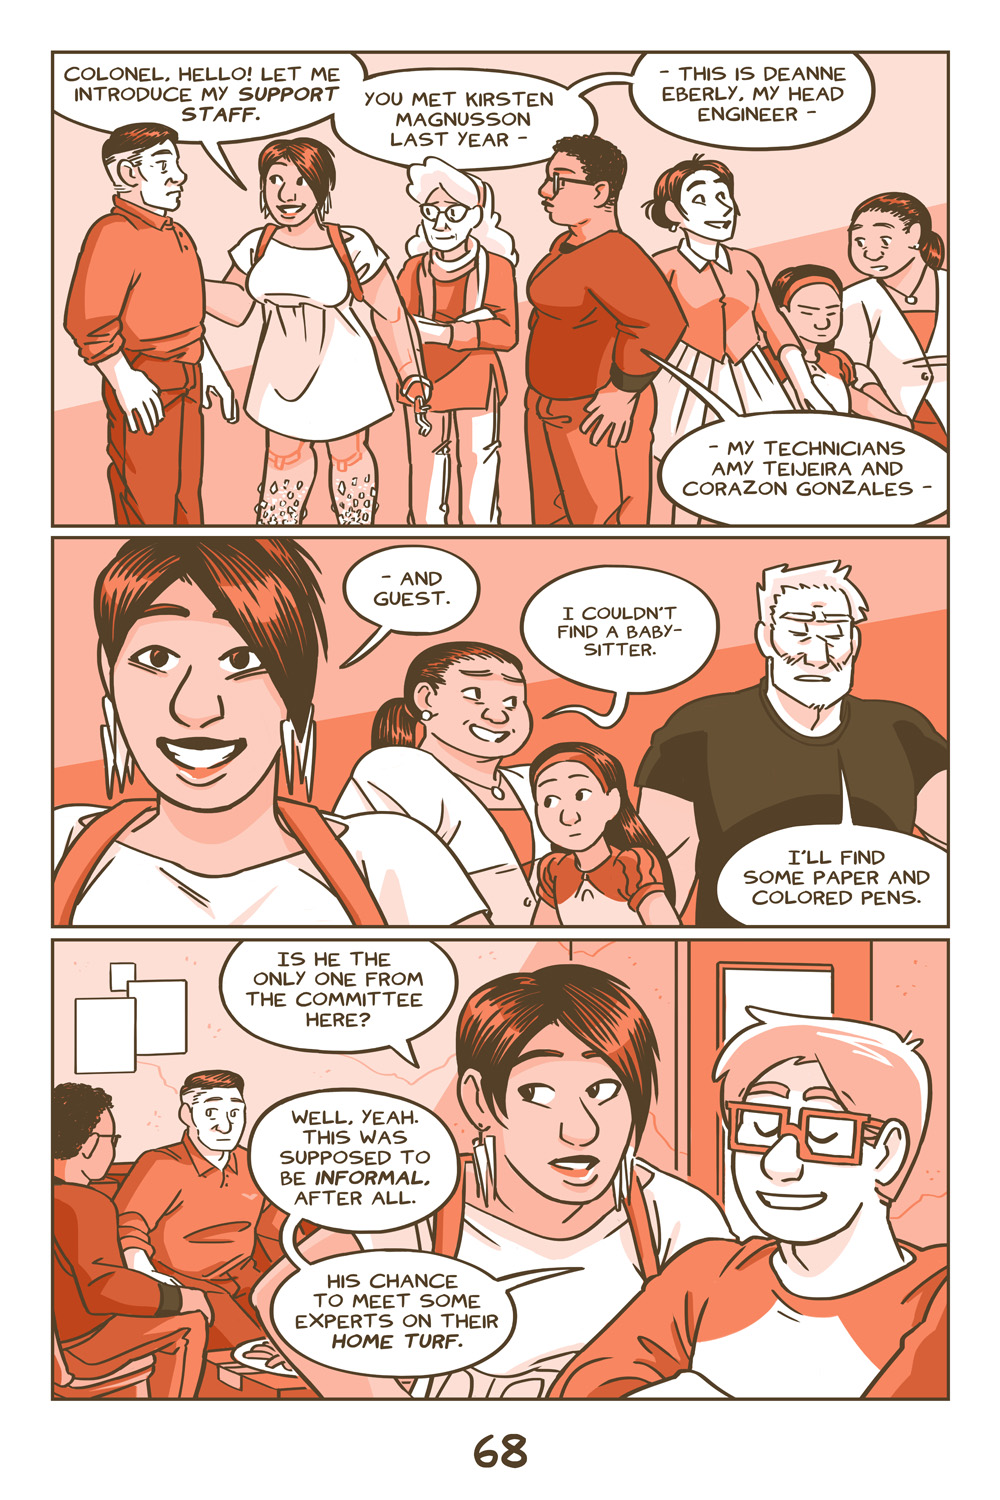 Chapter 4, Page 68